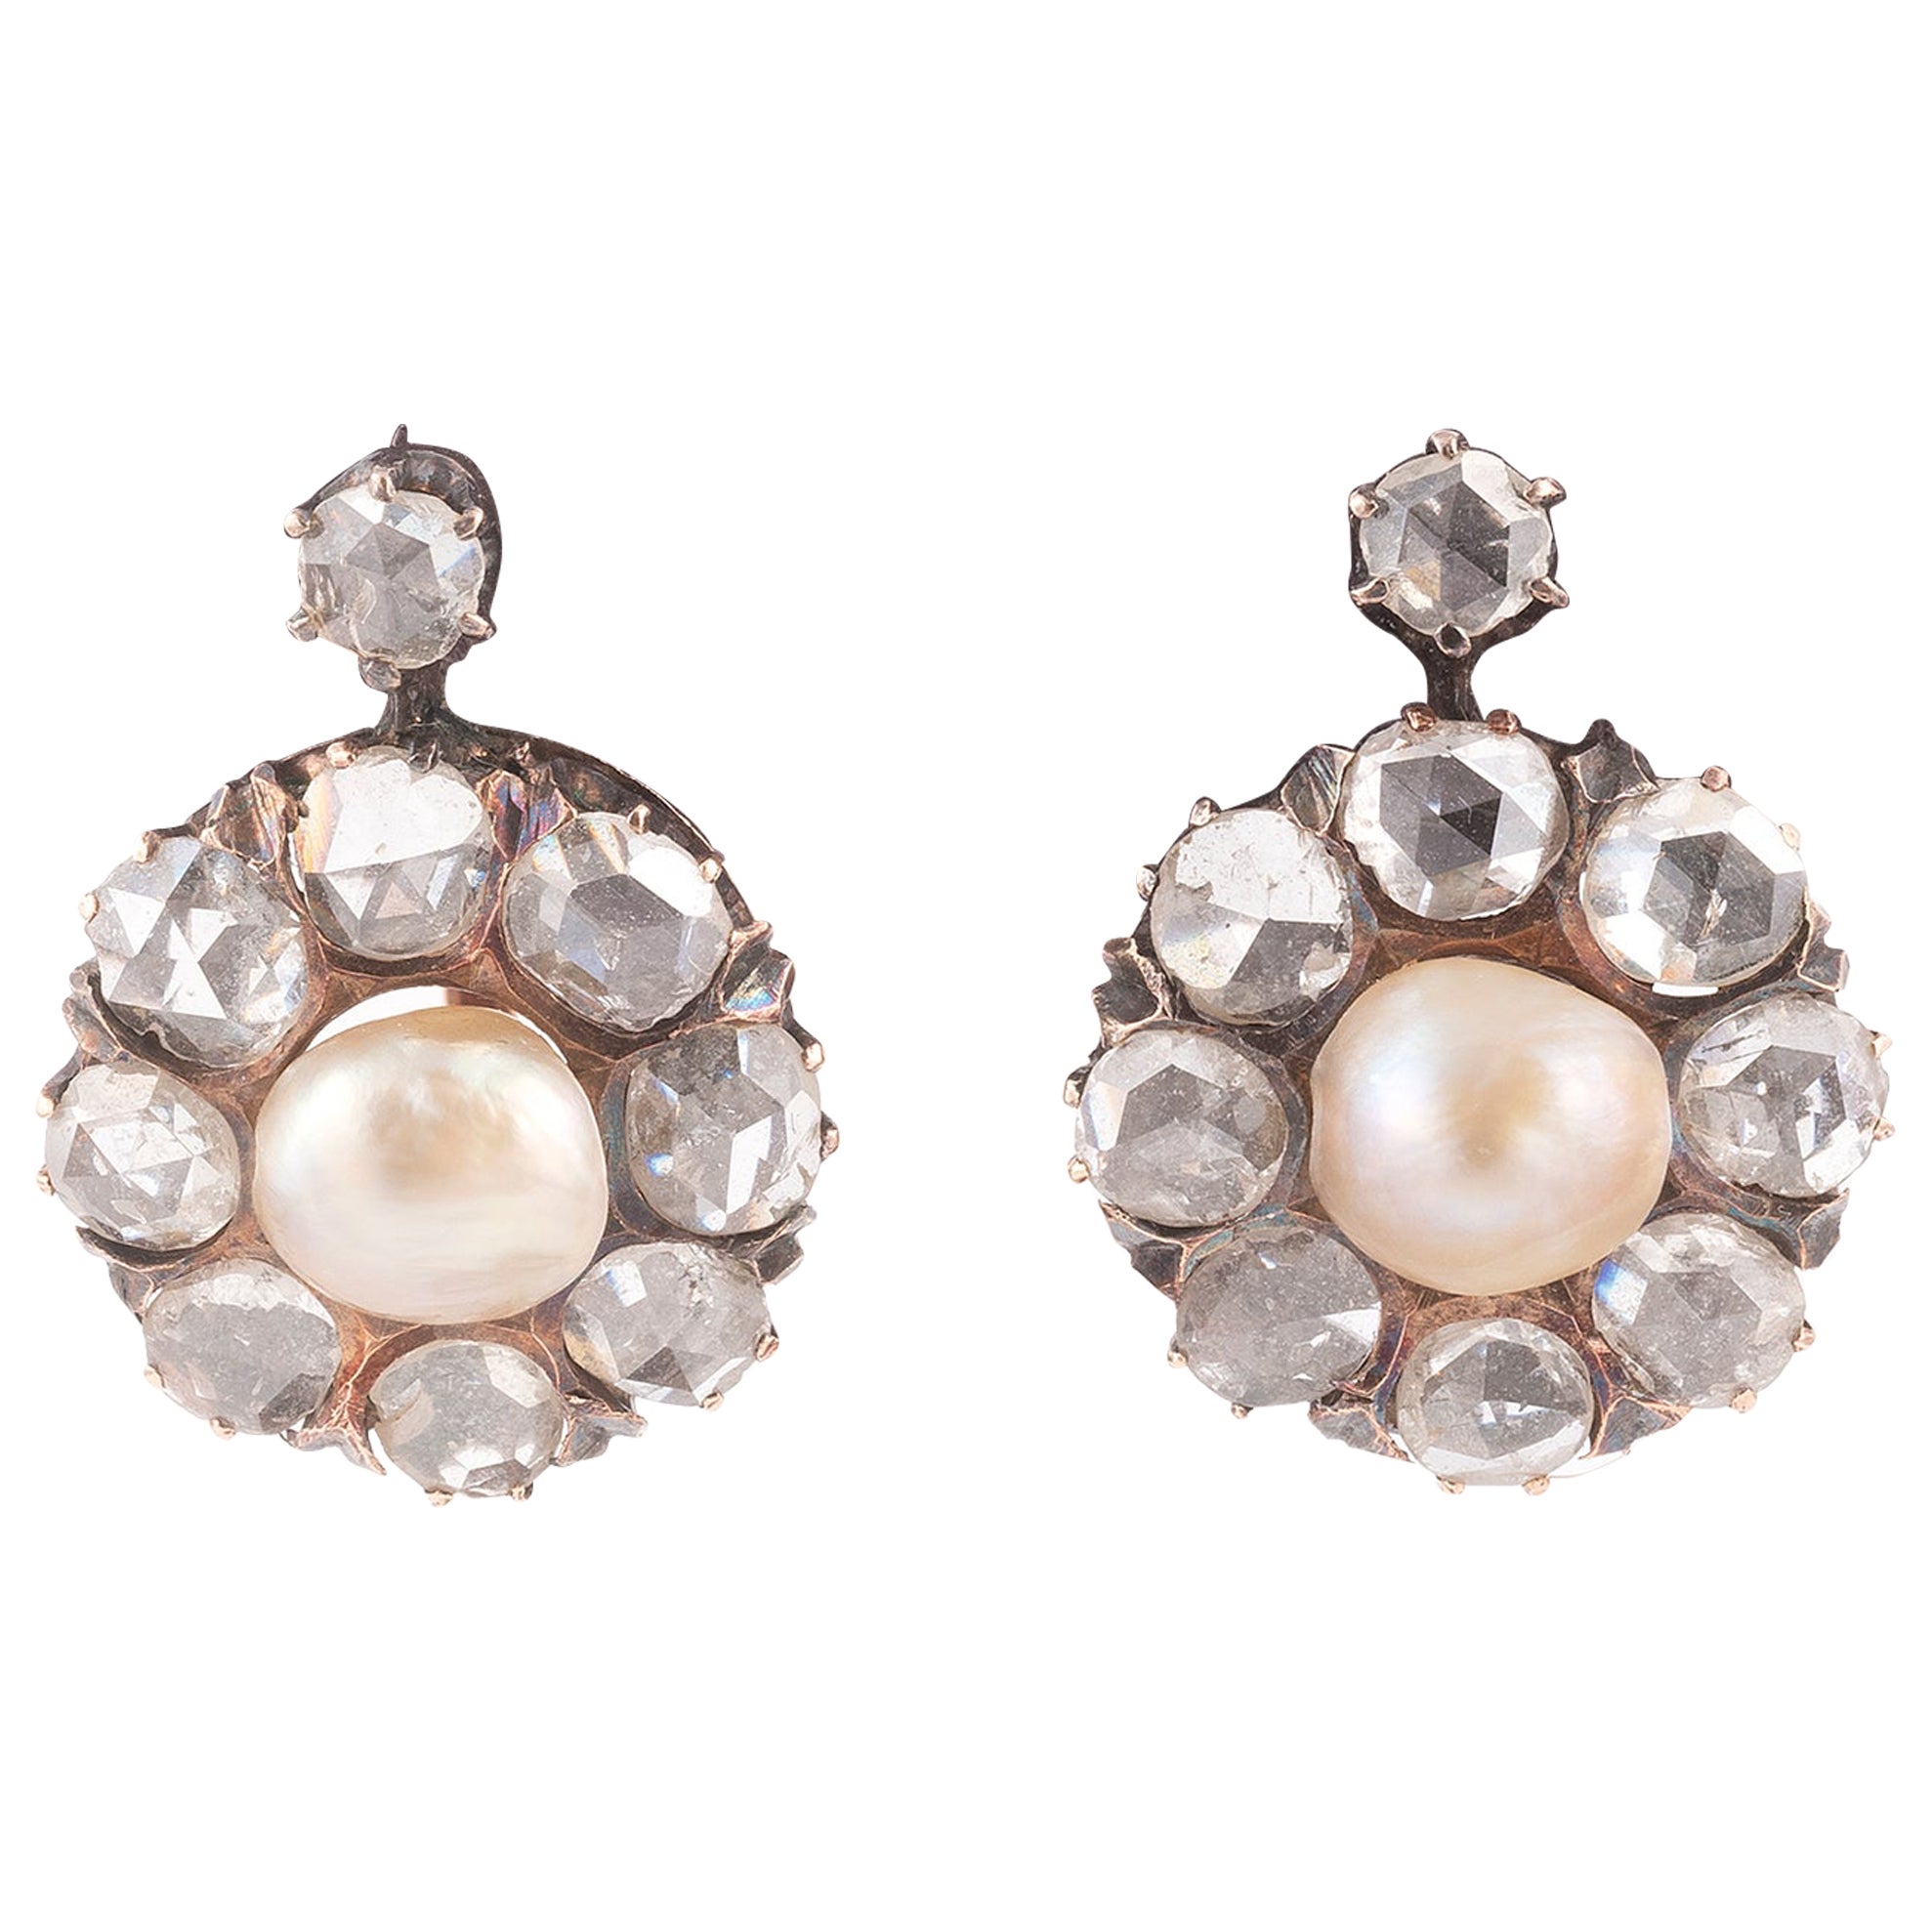 Antique Cushion Cut Antique Natural Pearl and Diamond Cluster Earrings